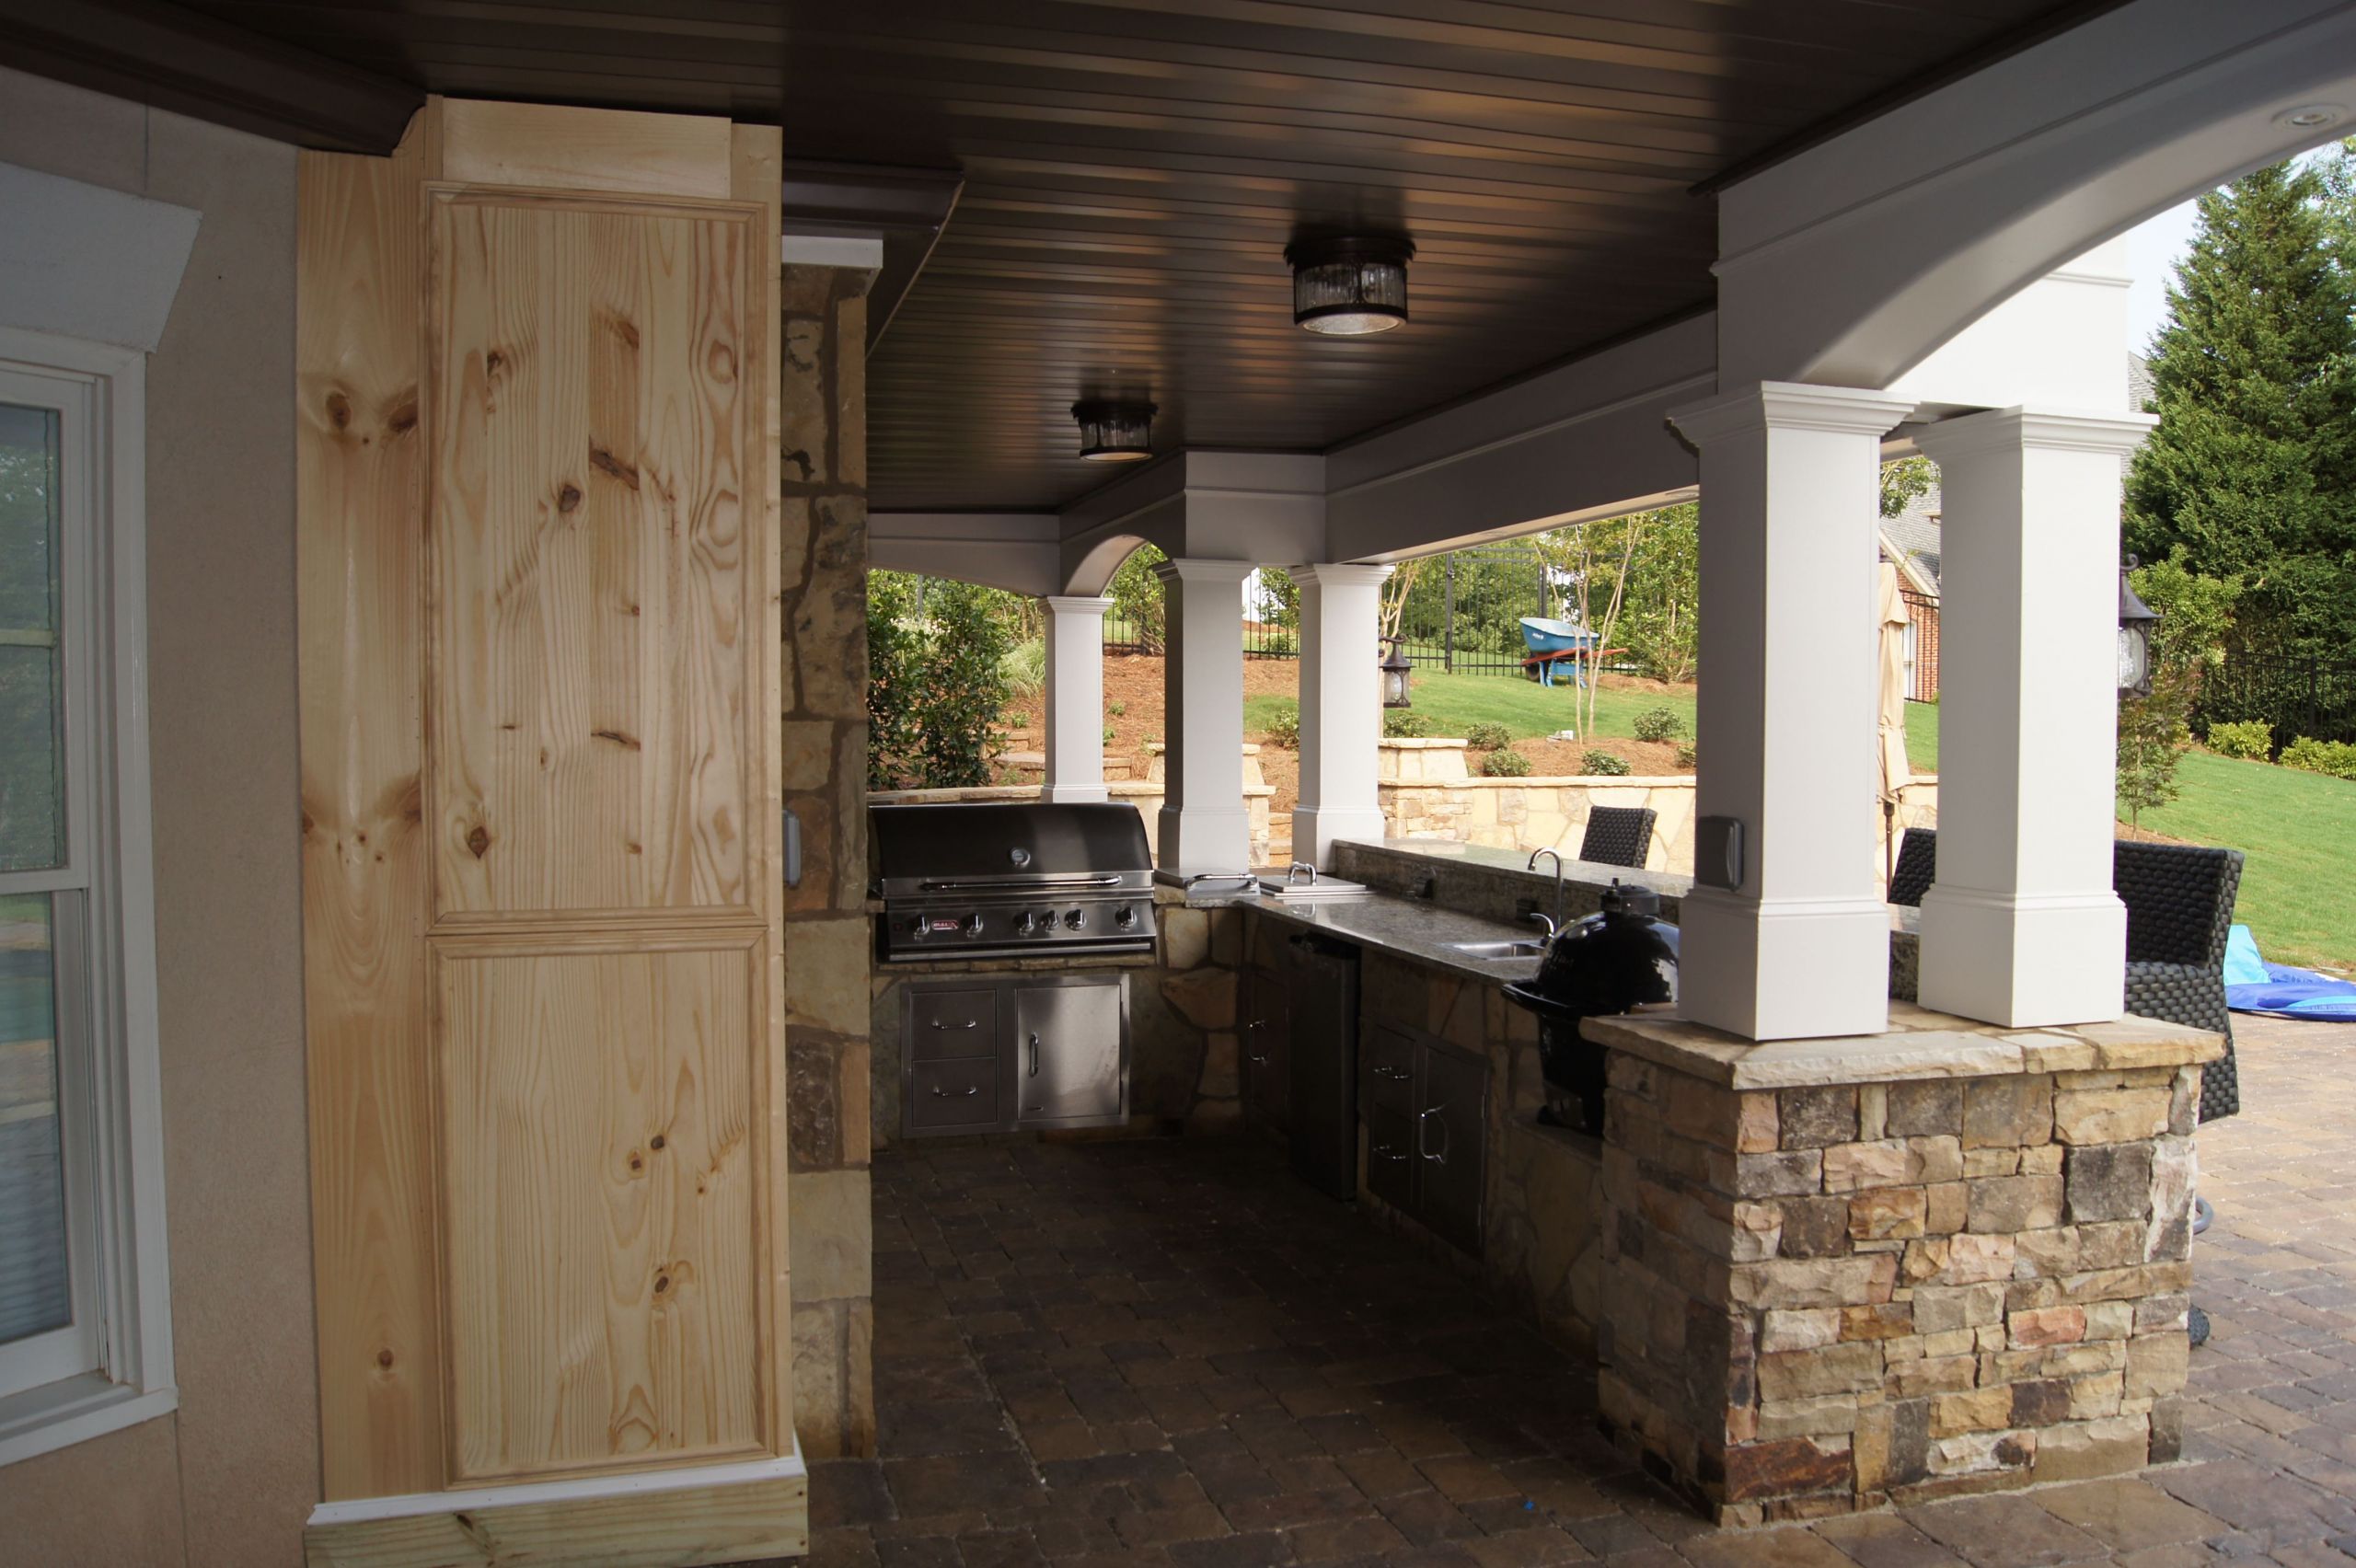 Outdoor Kitchen Under Deck
 This food bar area was designed as a nook under the deck